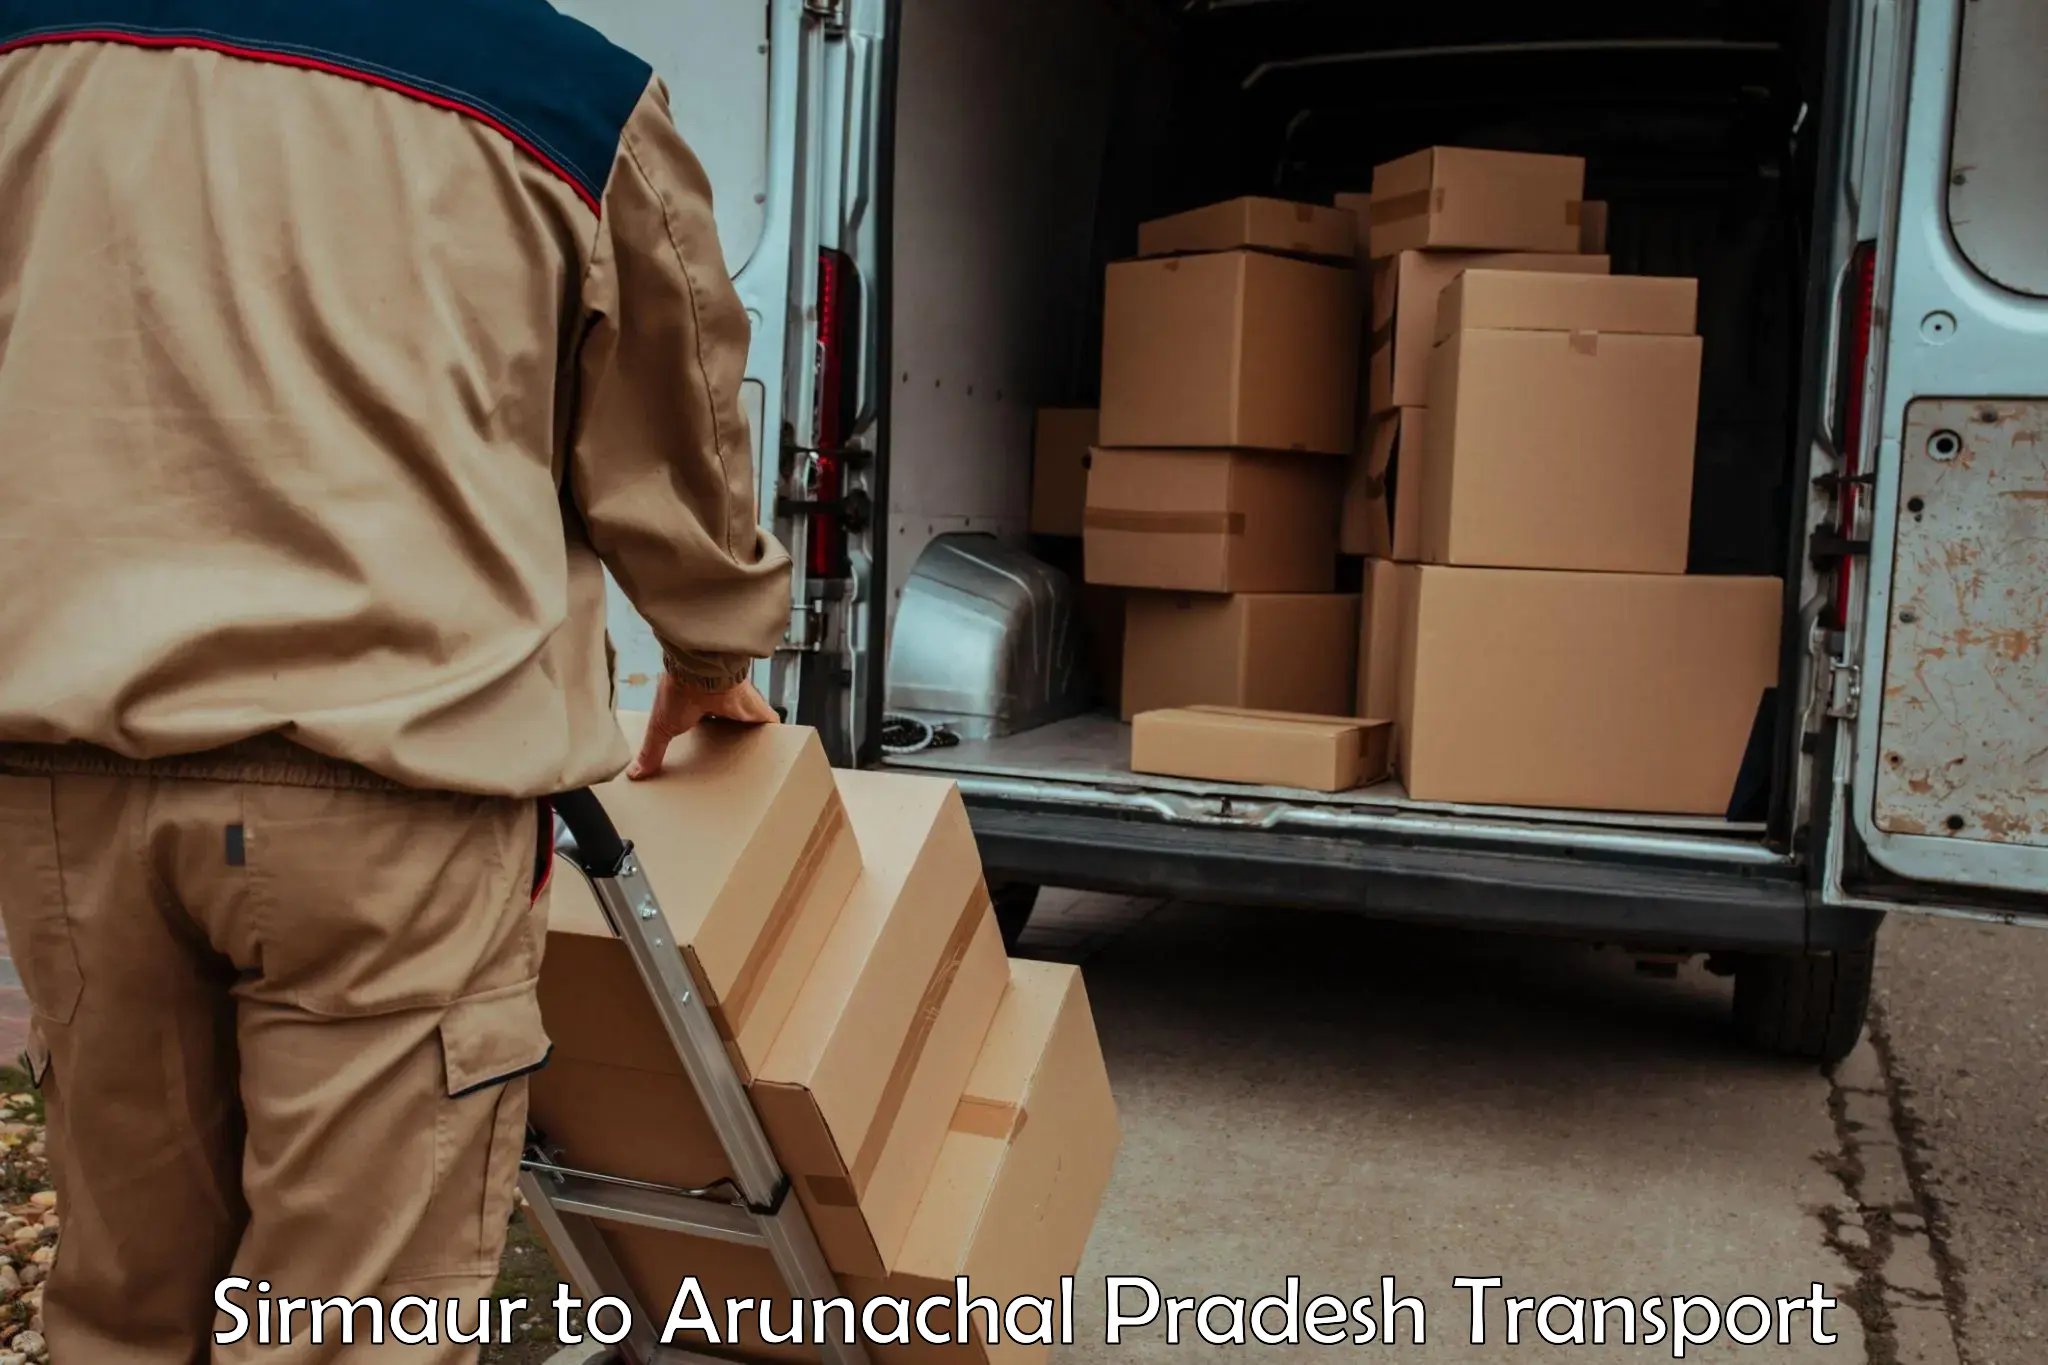 Truck transport companies in India Sirmaur to Lower Dibang Valley